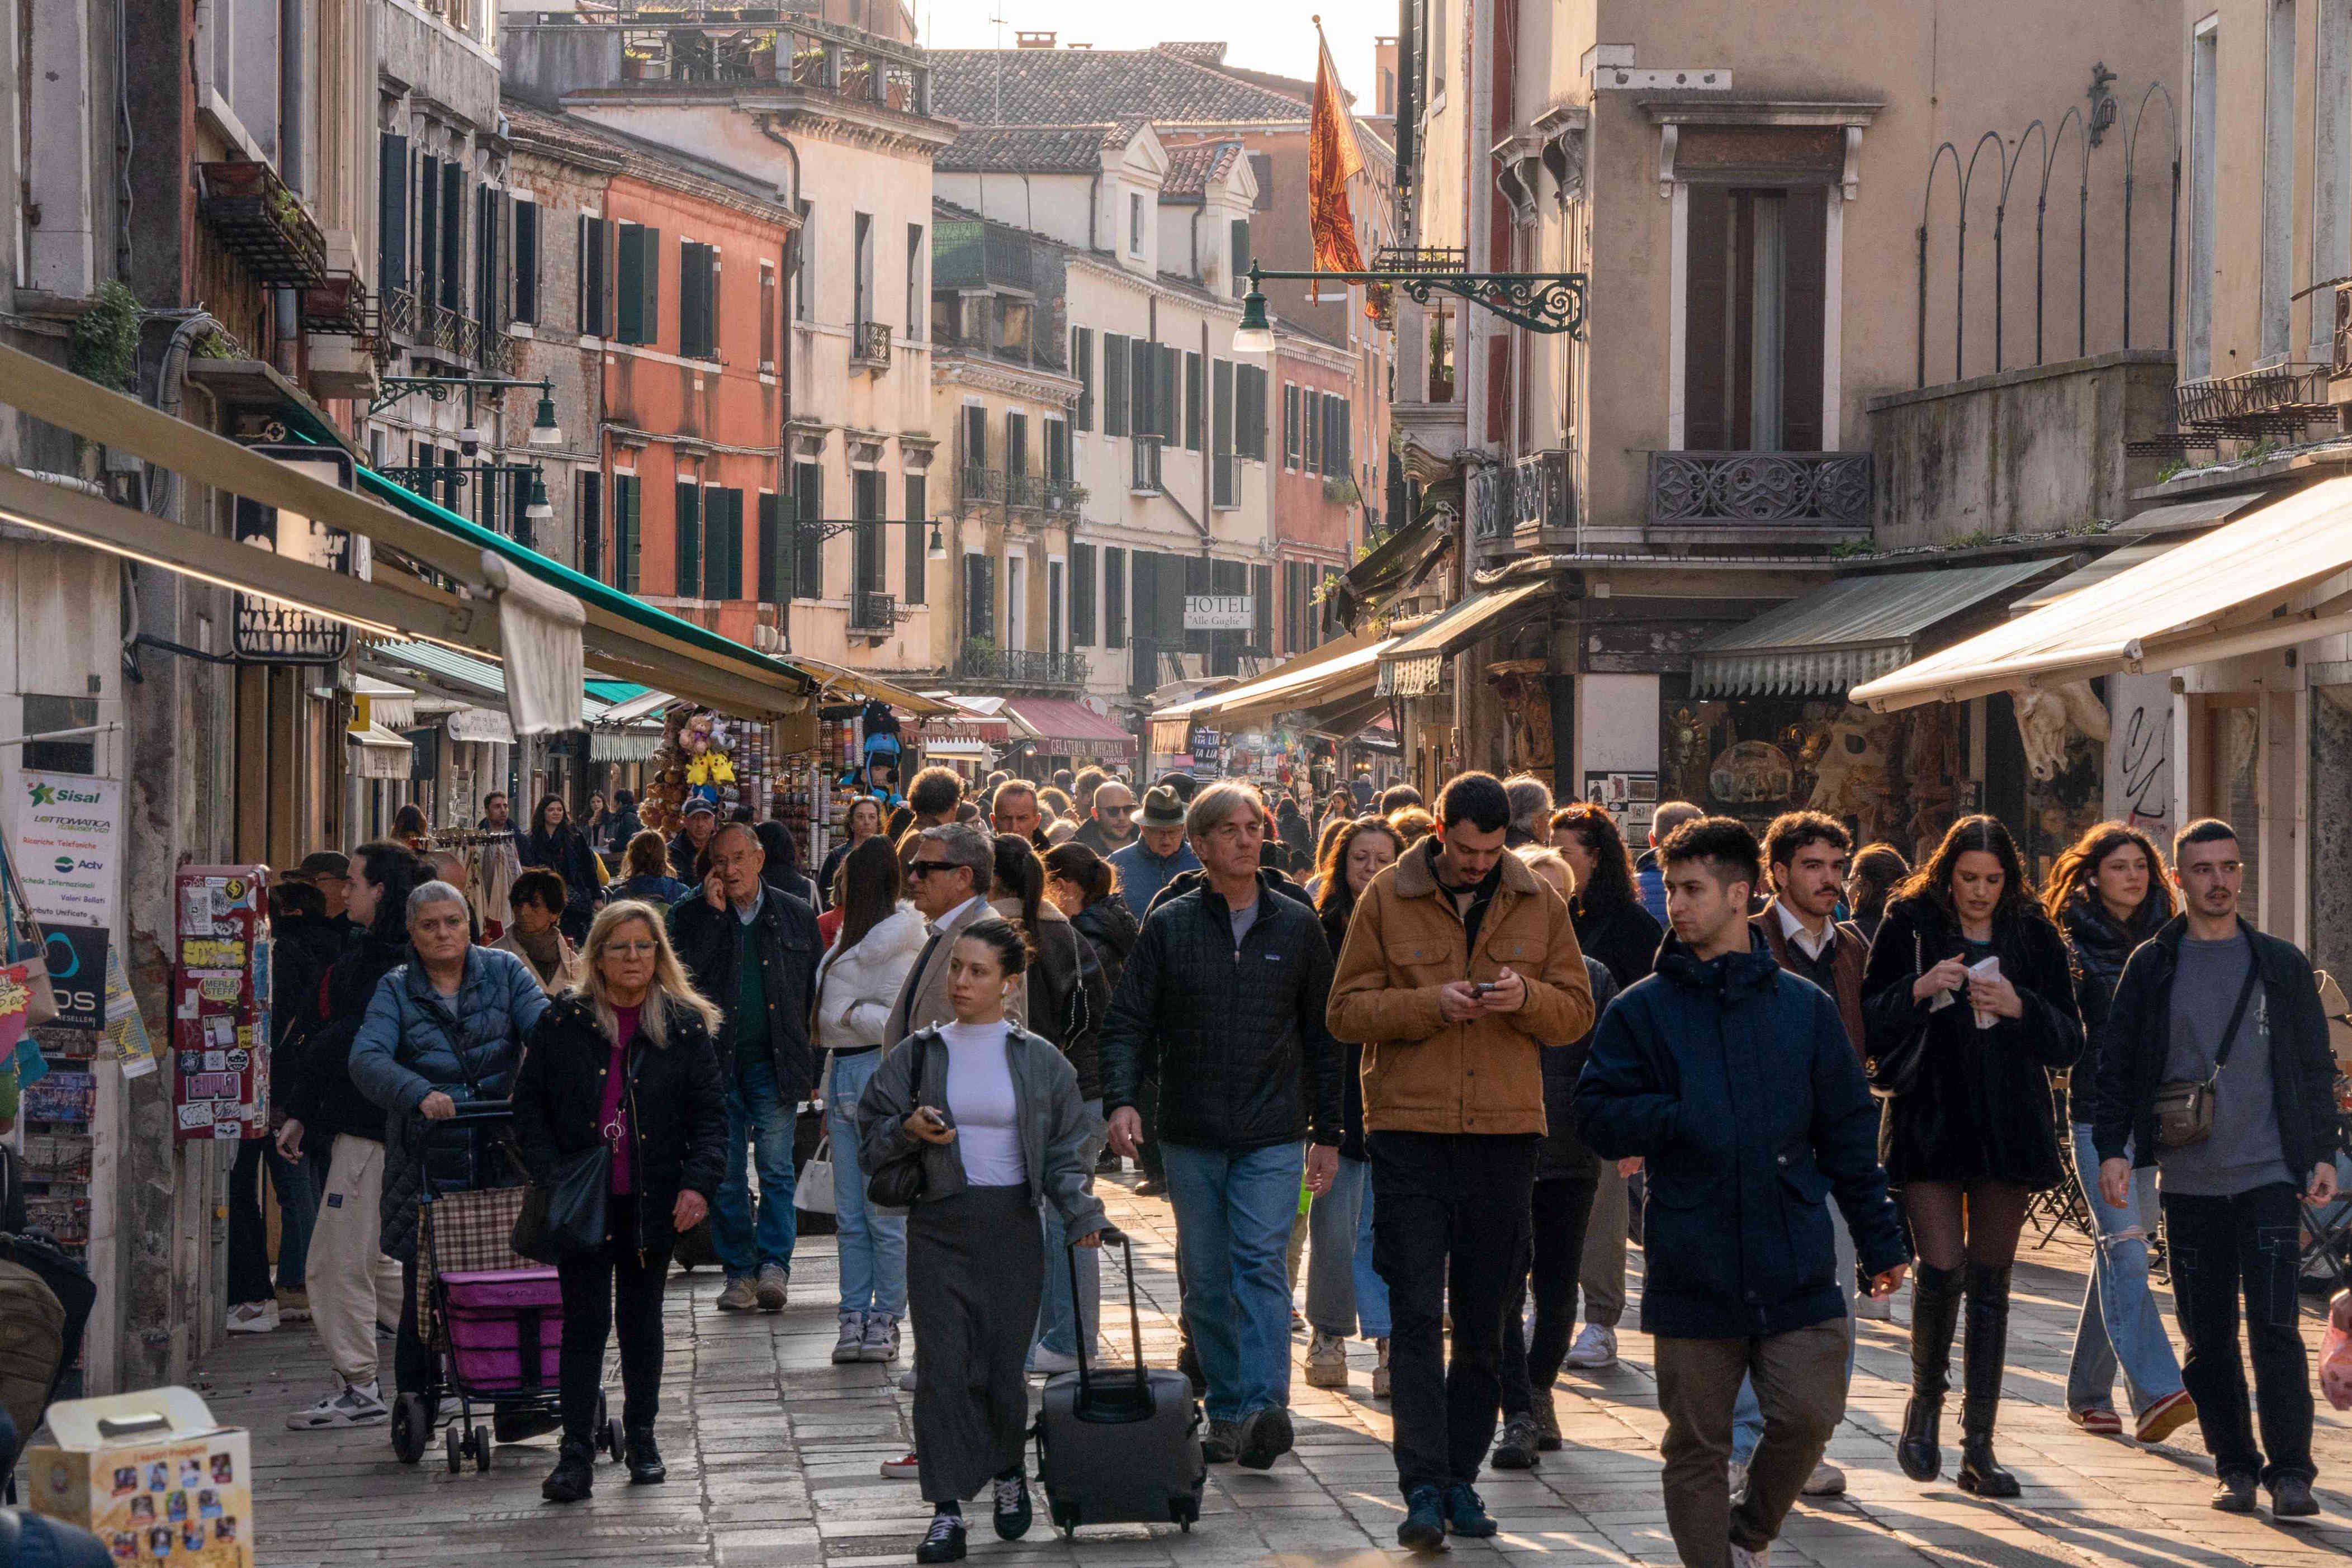 travelers should be extra mindful of pickpockets in these european countries, study shows